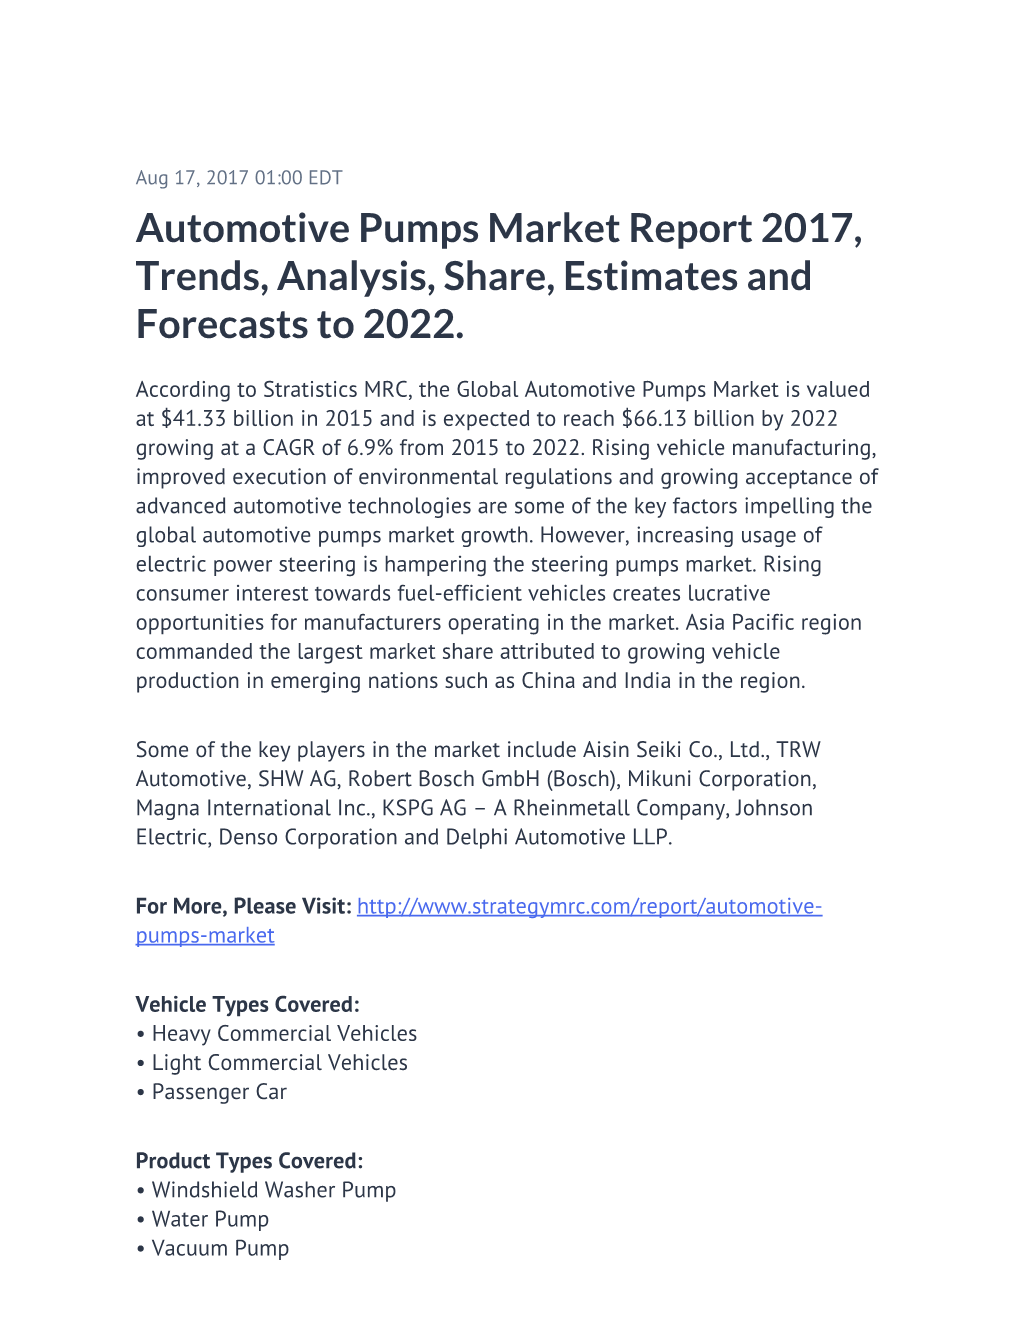 Automotive Pumps Market Report 2017, Trends, Analysis, Share, Estimates and Forecasts to 2022